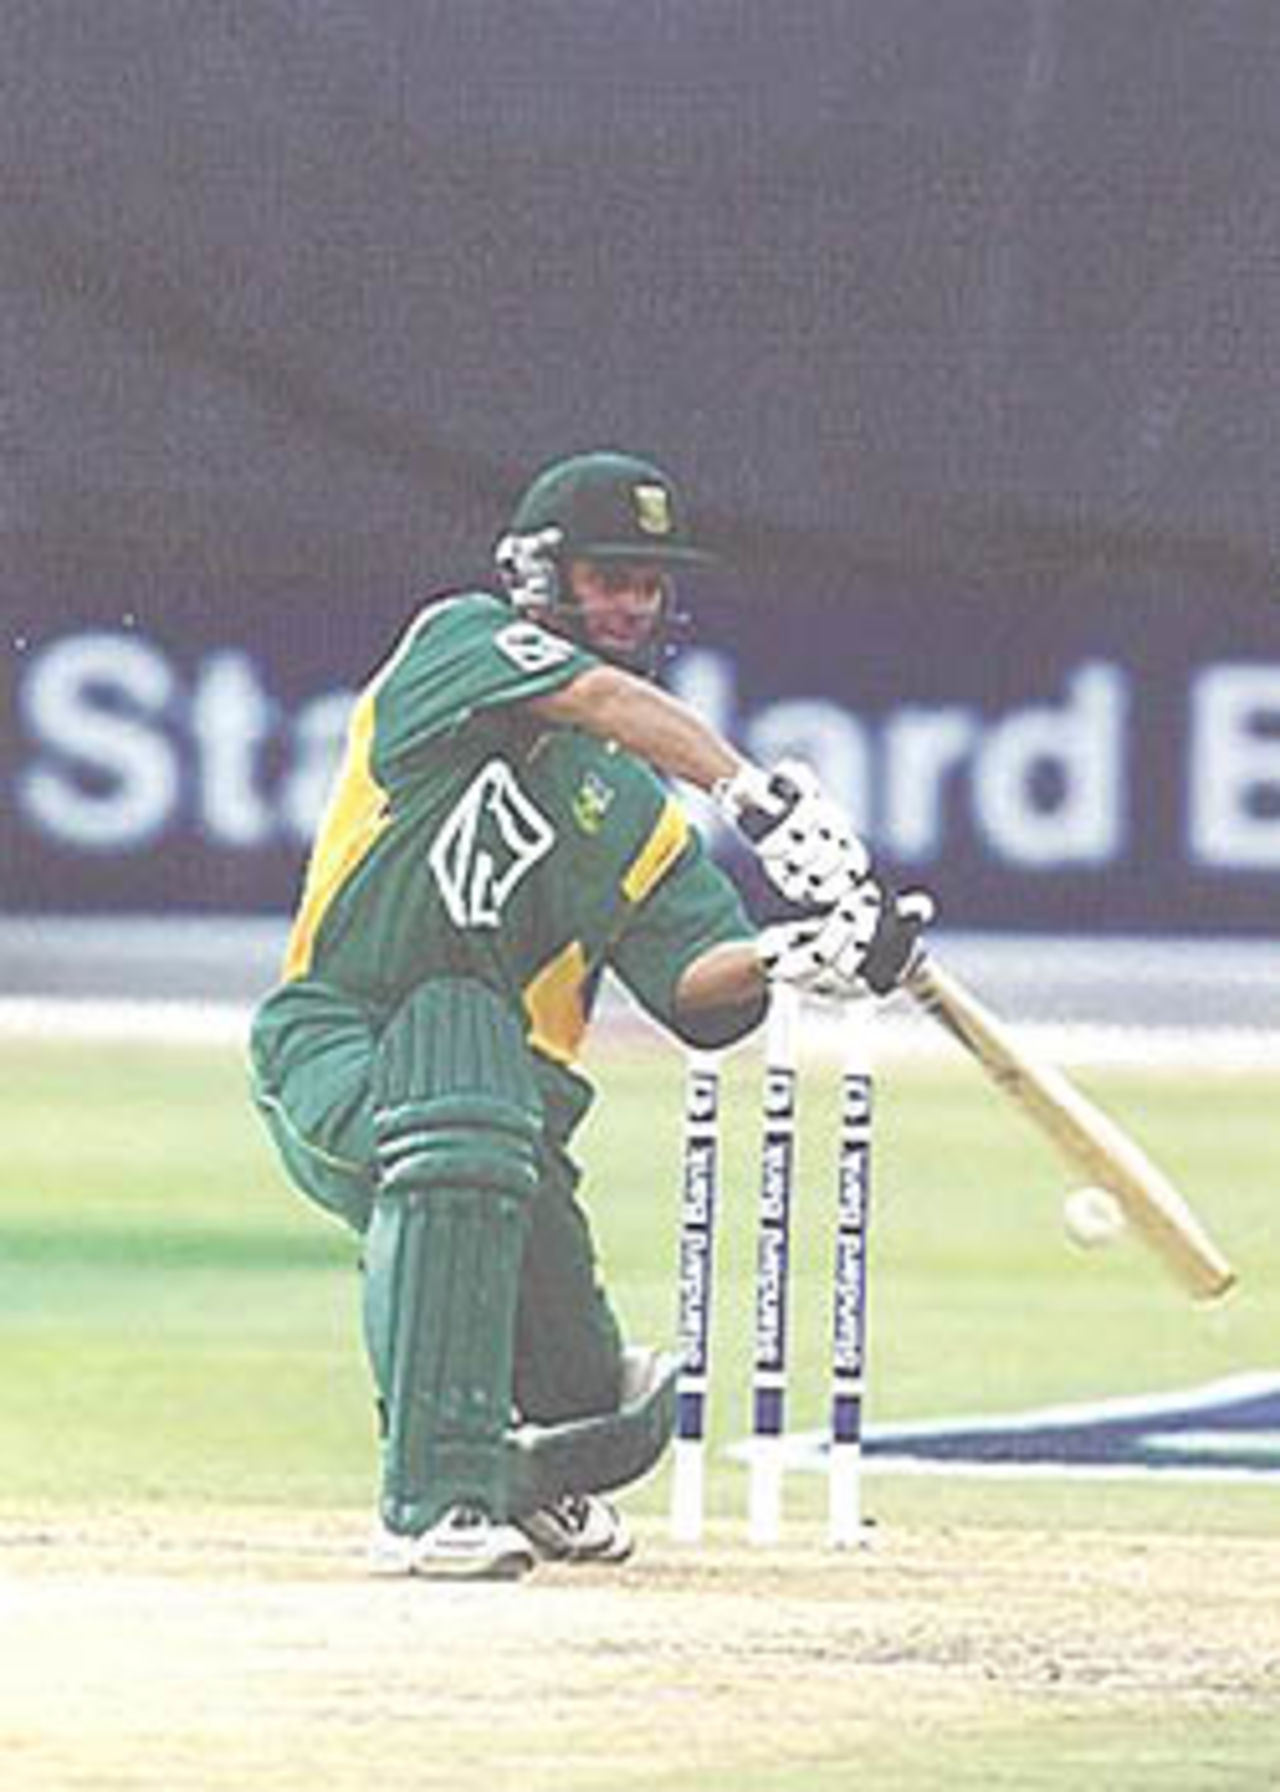 Gary Kirsten gets an inside edge onto the stumps, New Zealand in South Africa 2000/01, 2nd One-Day International, South Africa v New Zealand, Willowmoore Park, Benoni, 22 October 2000.